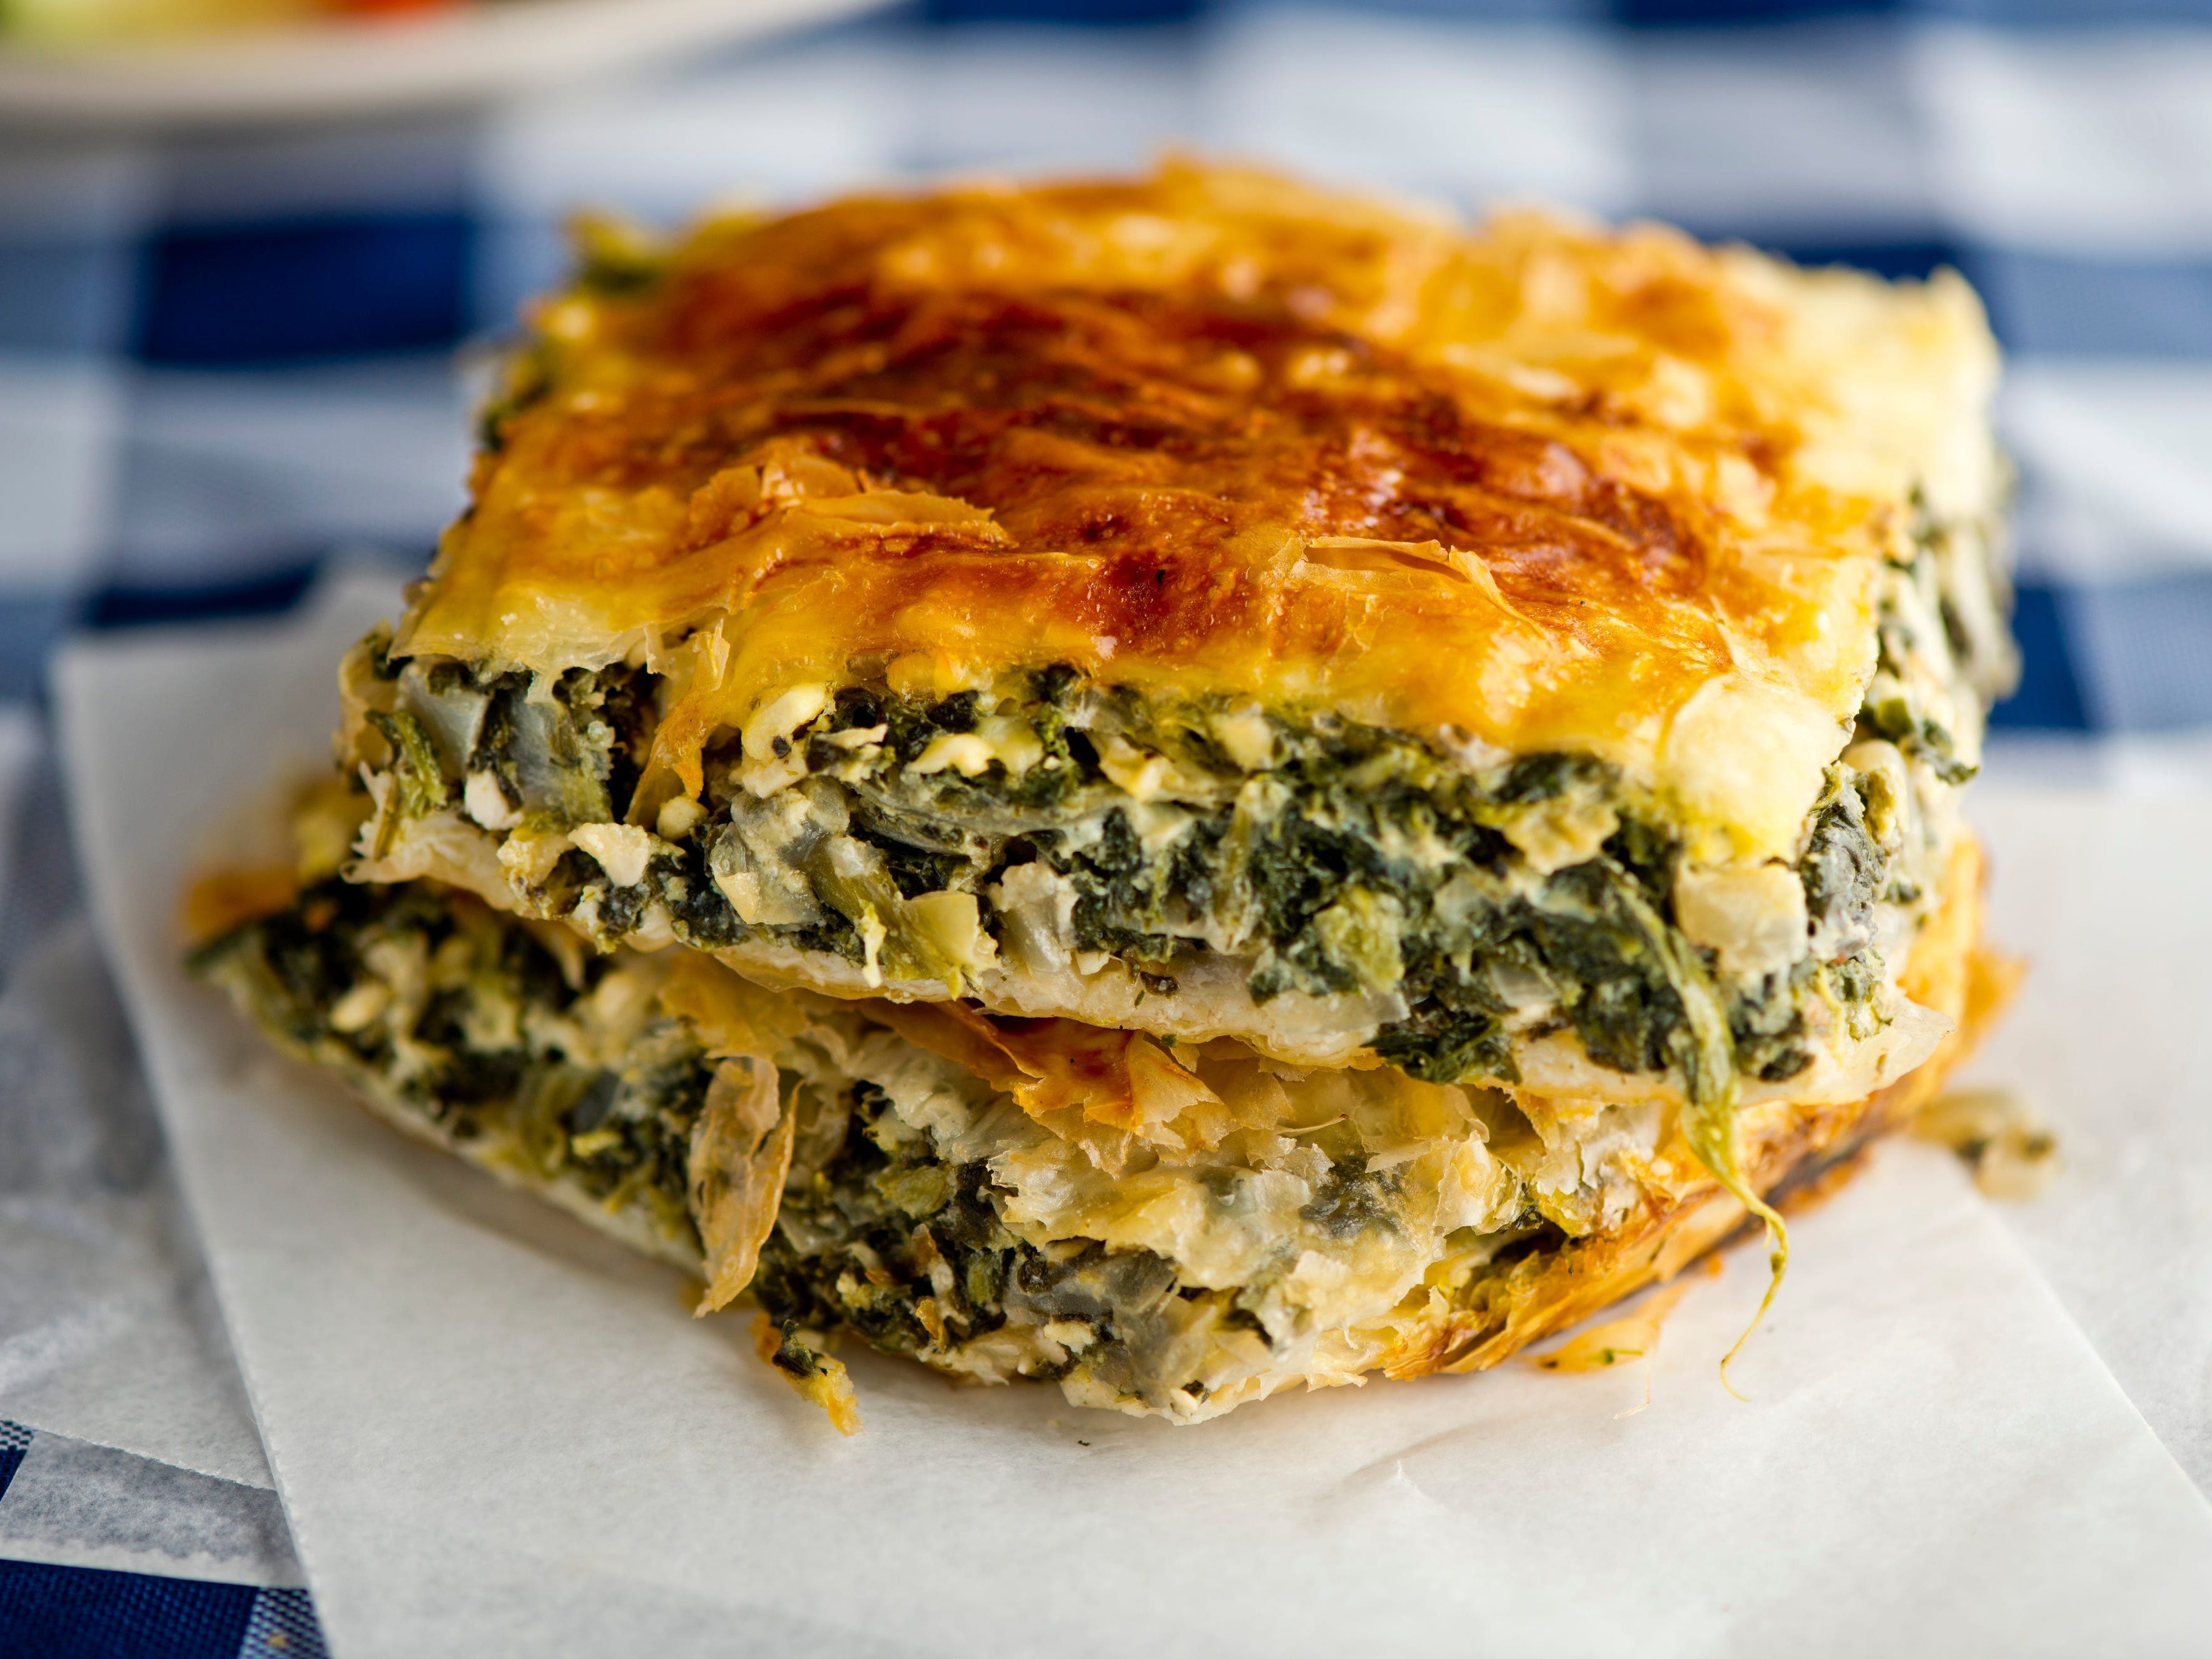 <p><a href="https://www.allrecipes.com/recipe/18417/spanakopita-greek-spinach-pie/">According to All Recipes</a>, spanakopita is a flaky pie packed with cooked spinach, onions, feta cheese, eggs, and seasoning.</p><p>The handheld treat usually features a top and base made of phyllo — a delicate and incredibly thin pastry.</p>